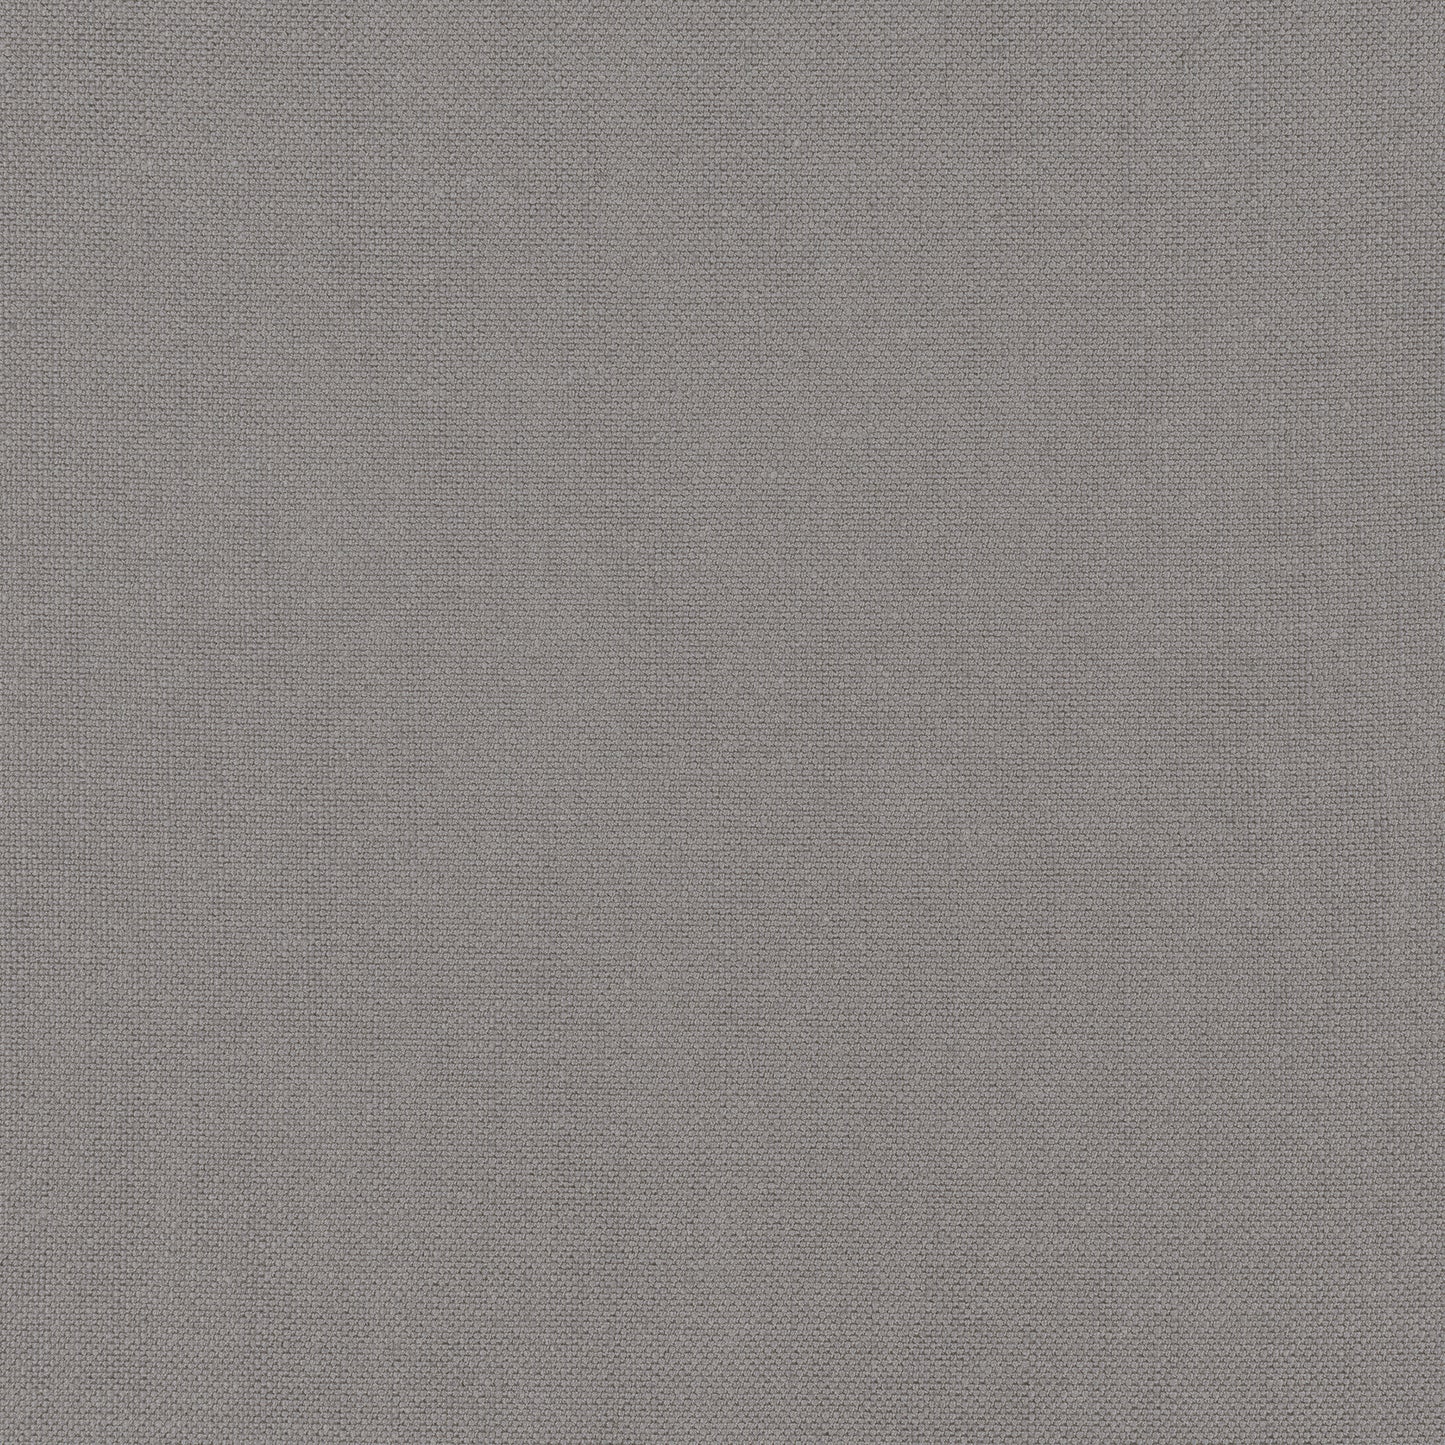 Purchase Thibaut Fabric SKU# FWW7637 pattern name Palisade Linen color Heather